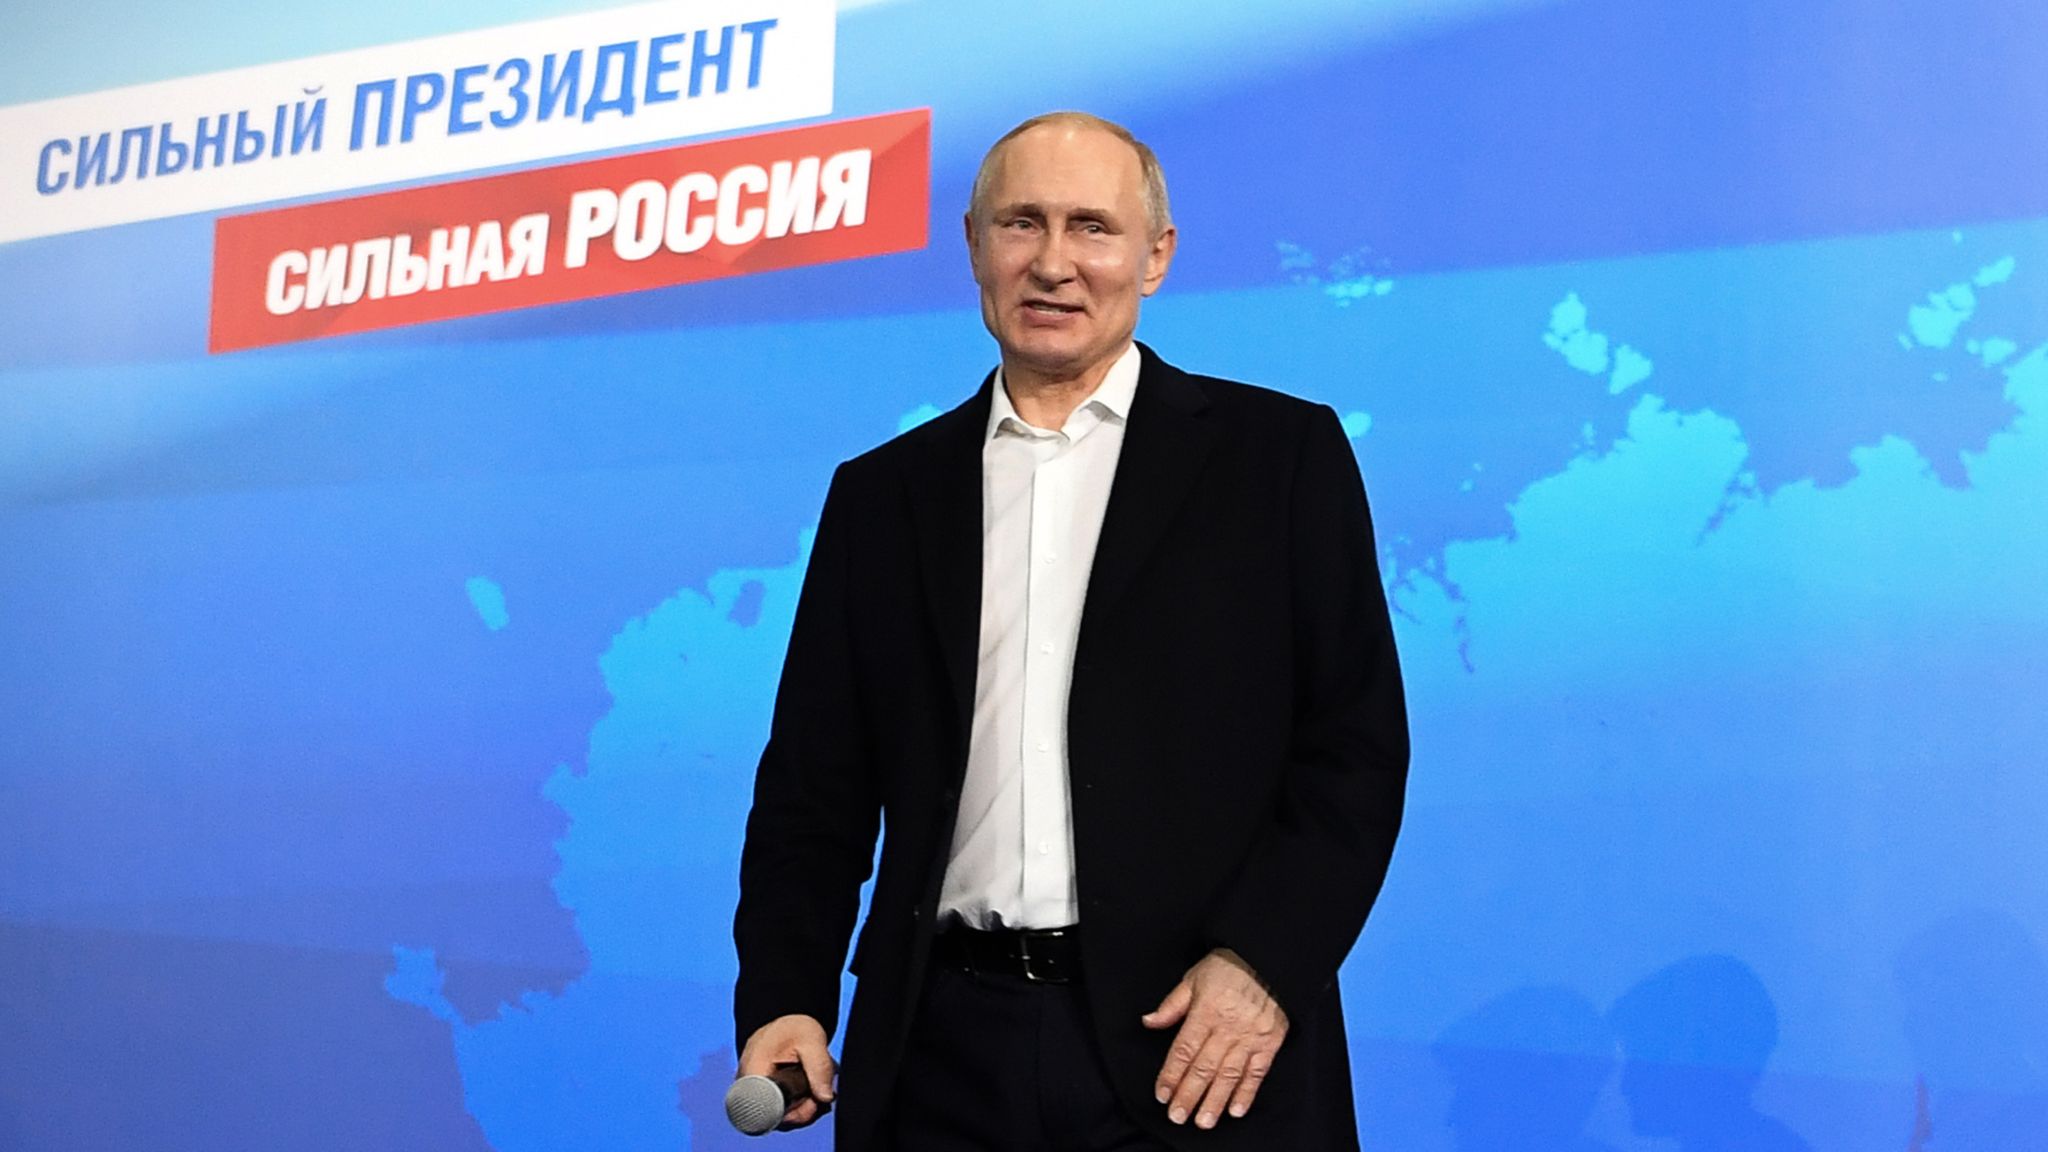 Vladimir Putin Wins Fourth Term As Russian President With 77 Of Vote